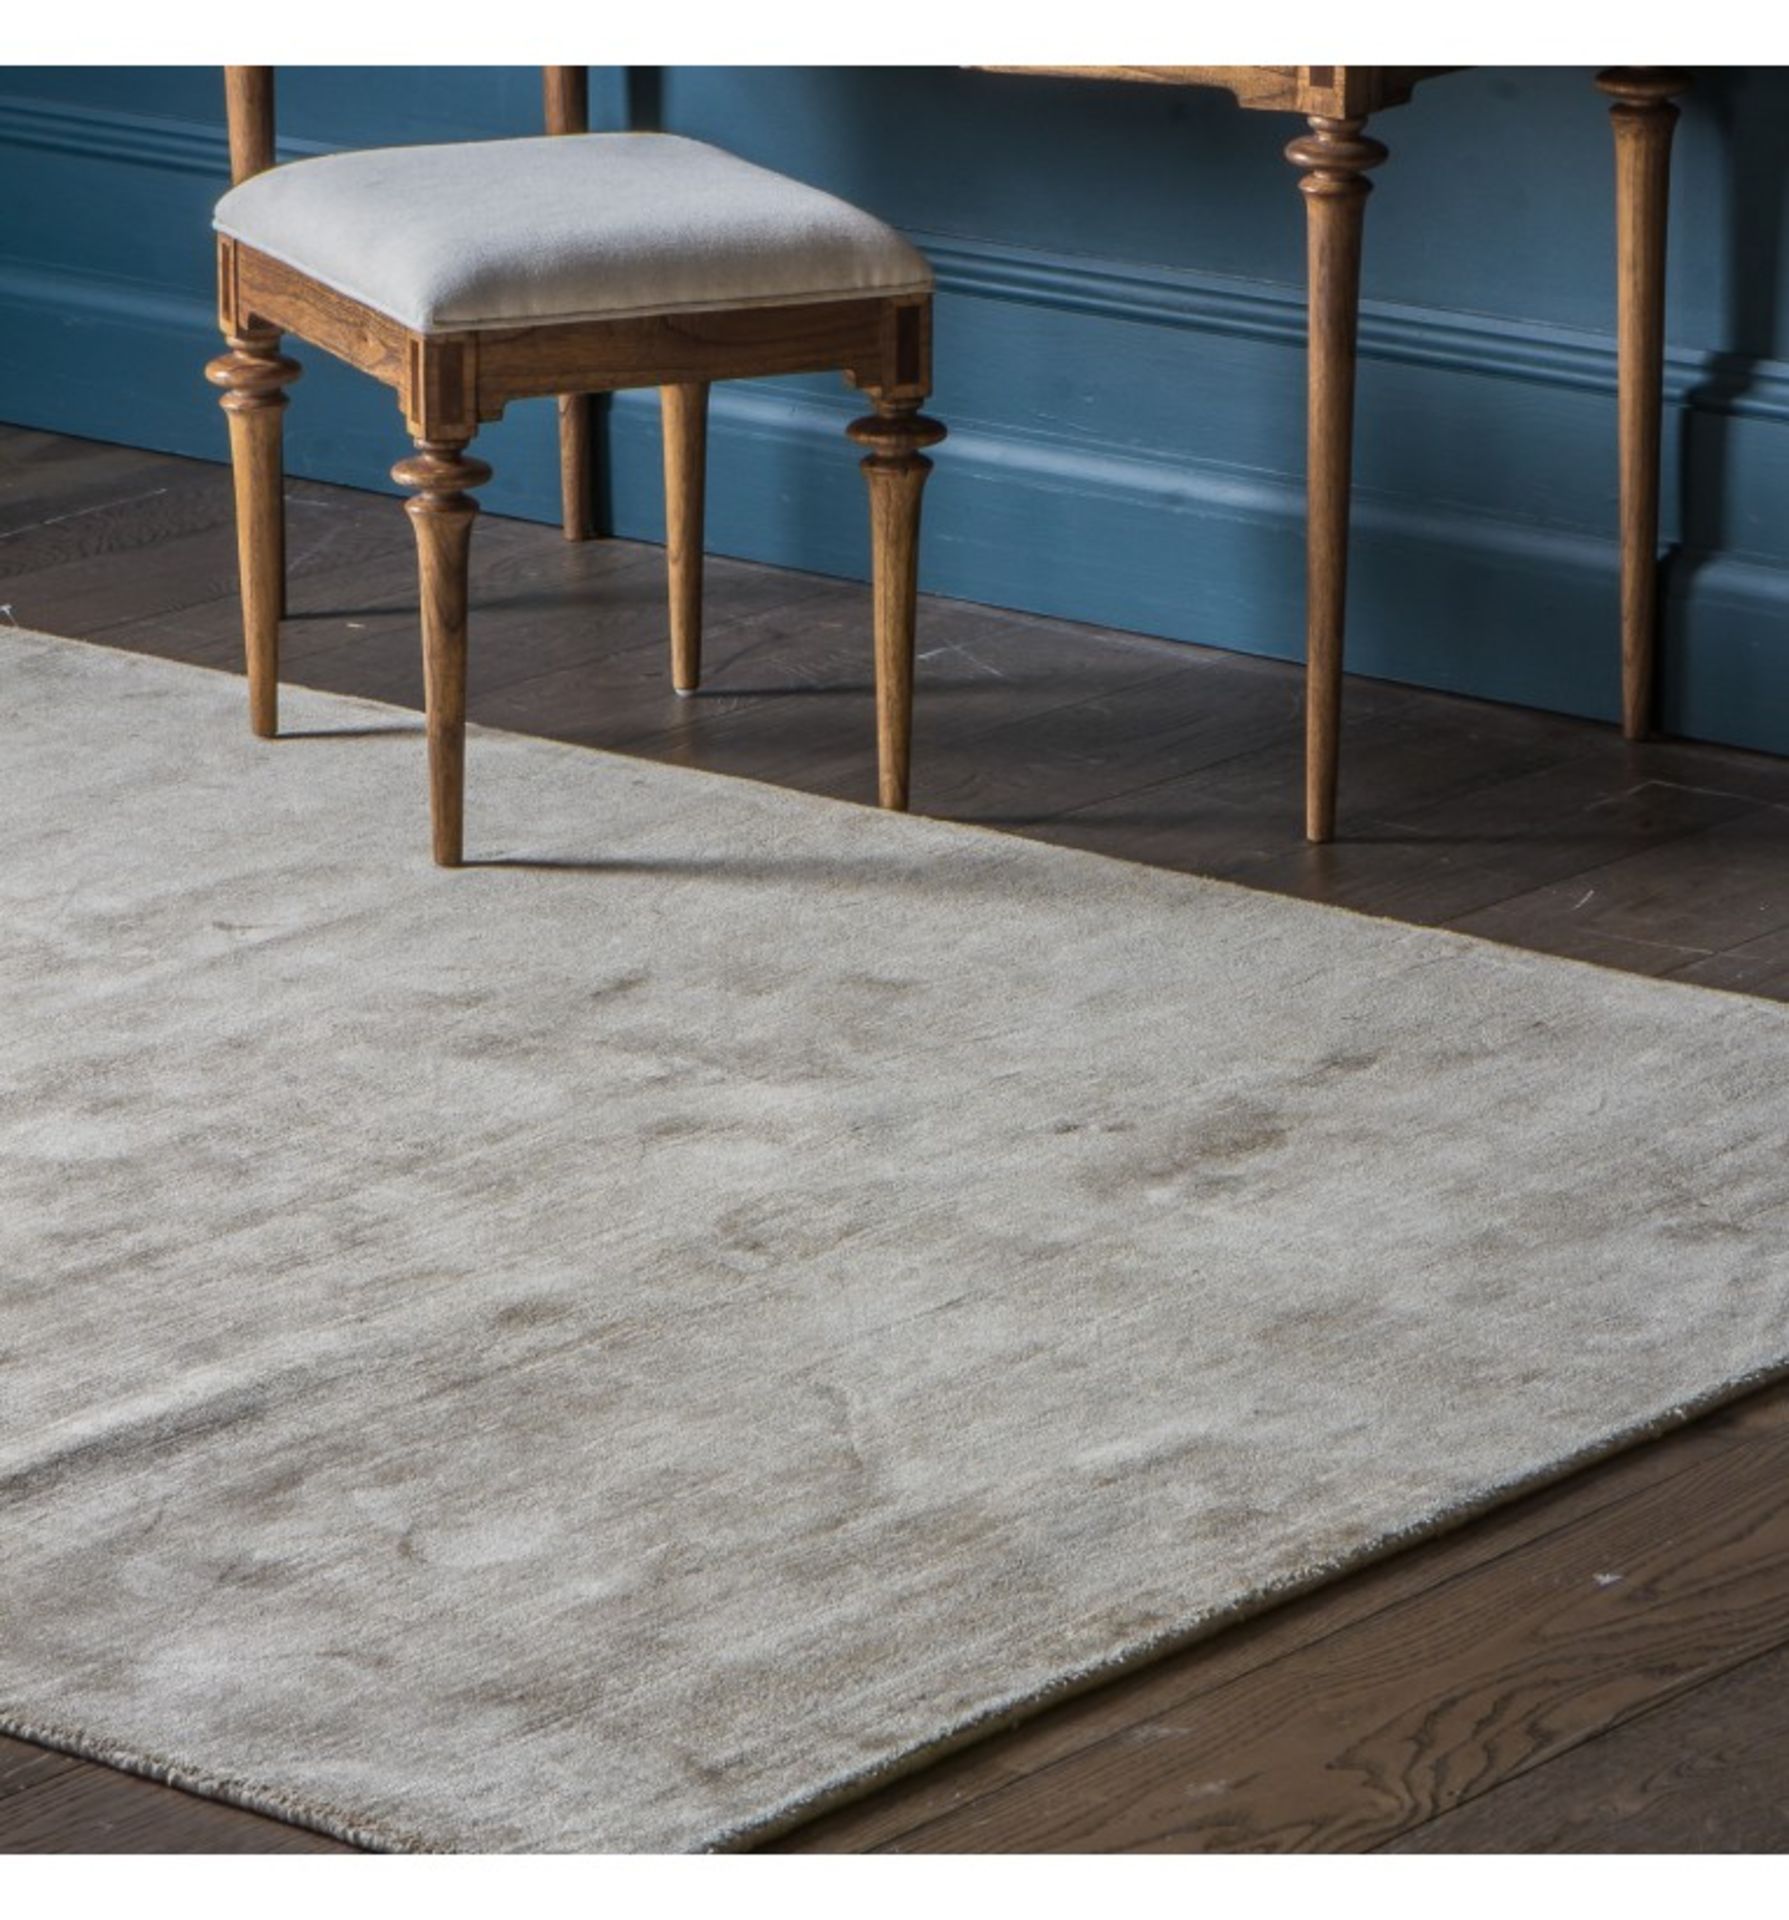 Oakwood Rug Natural Subtle and stylish, this tonal rug complements any interior decor. W1600 x